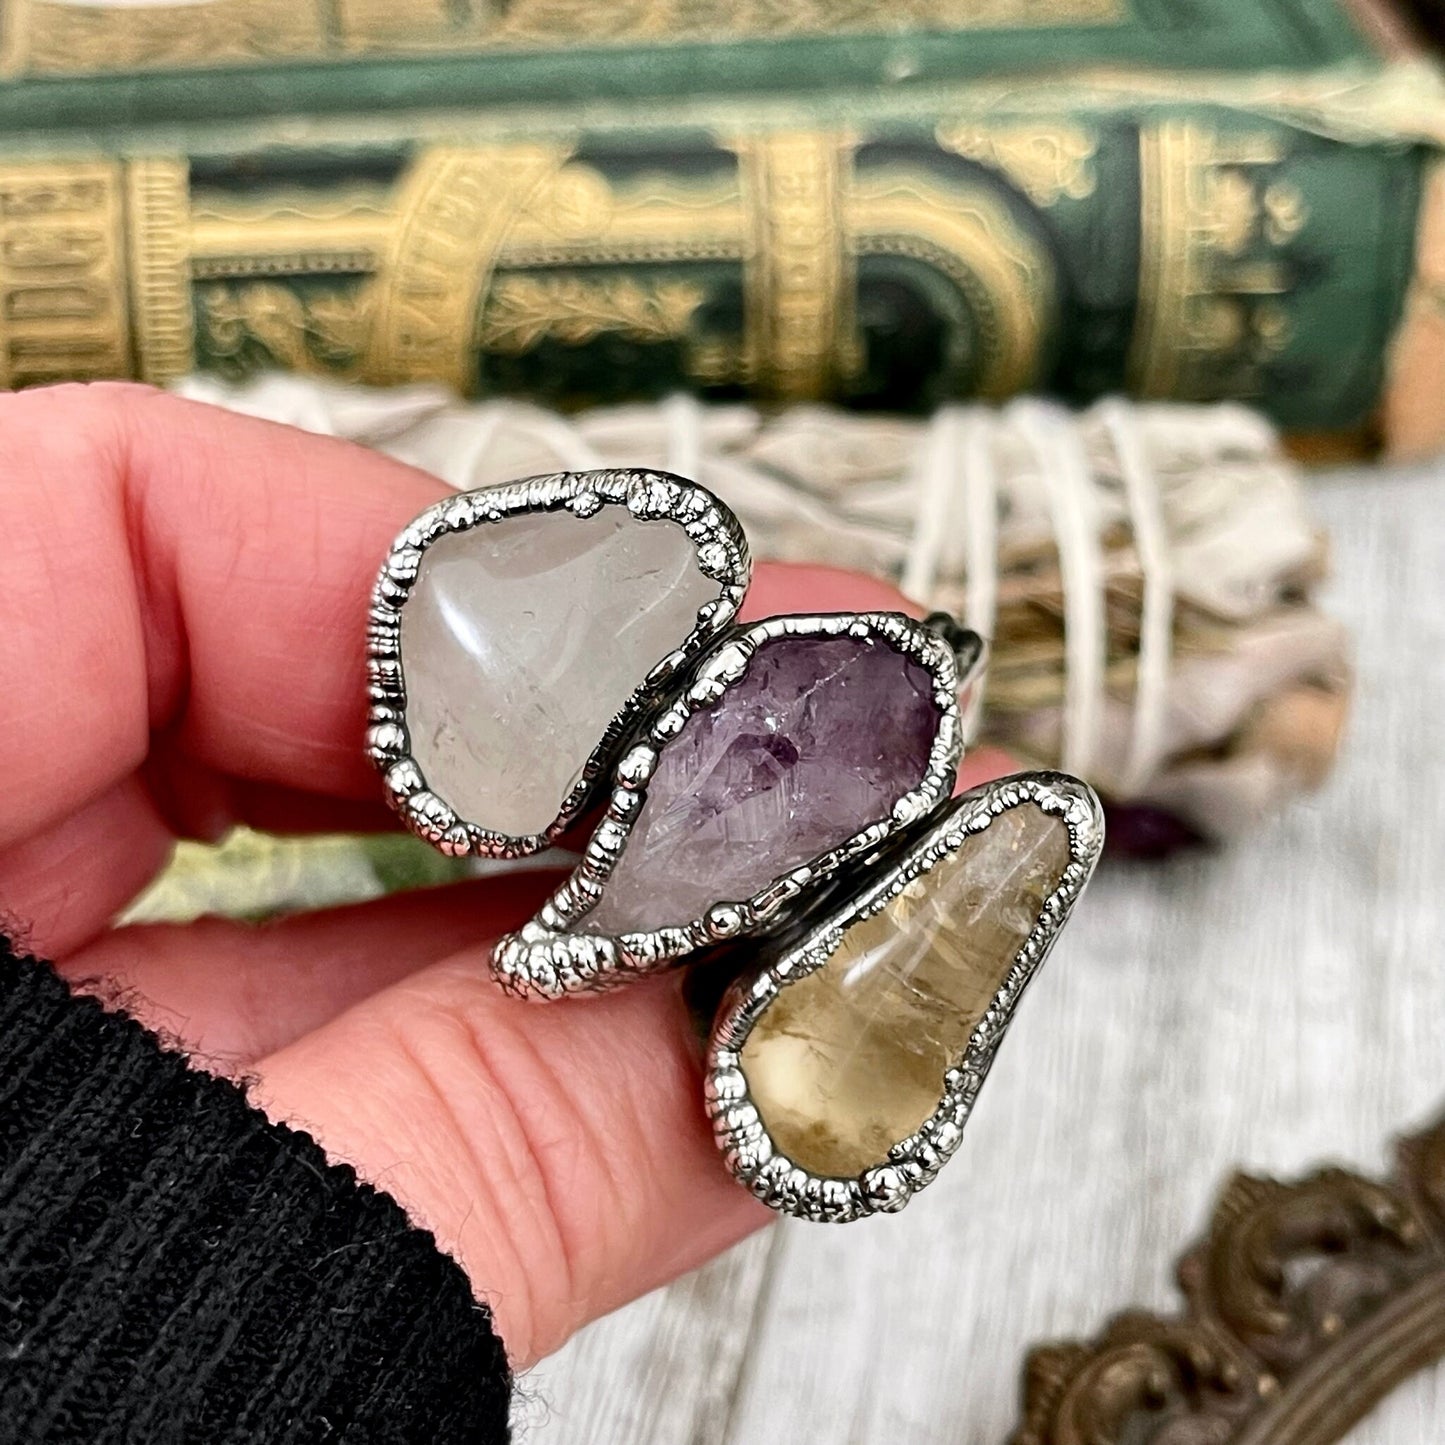 Size 7 Crystal Ring - Three Stone Ring Citrine Clear Quartz Amethyst Ring in Silver / Foxlark Collection - One of a Kind / Crystal Jewelry